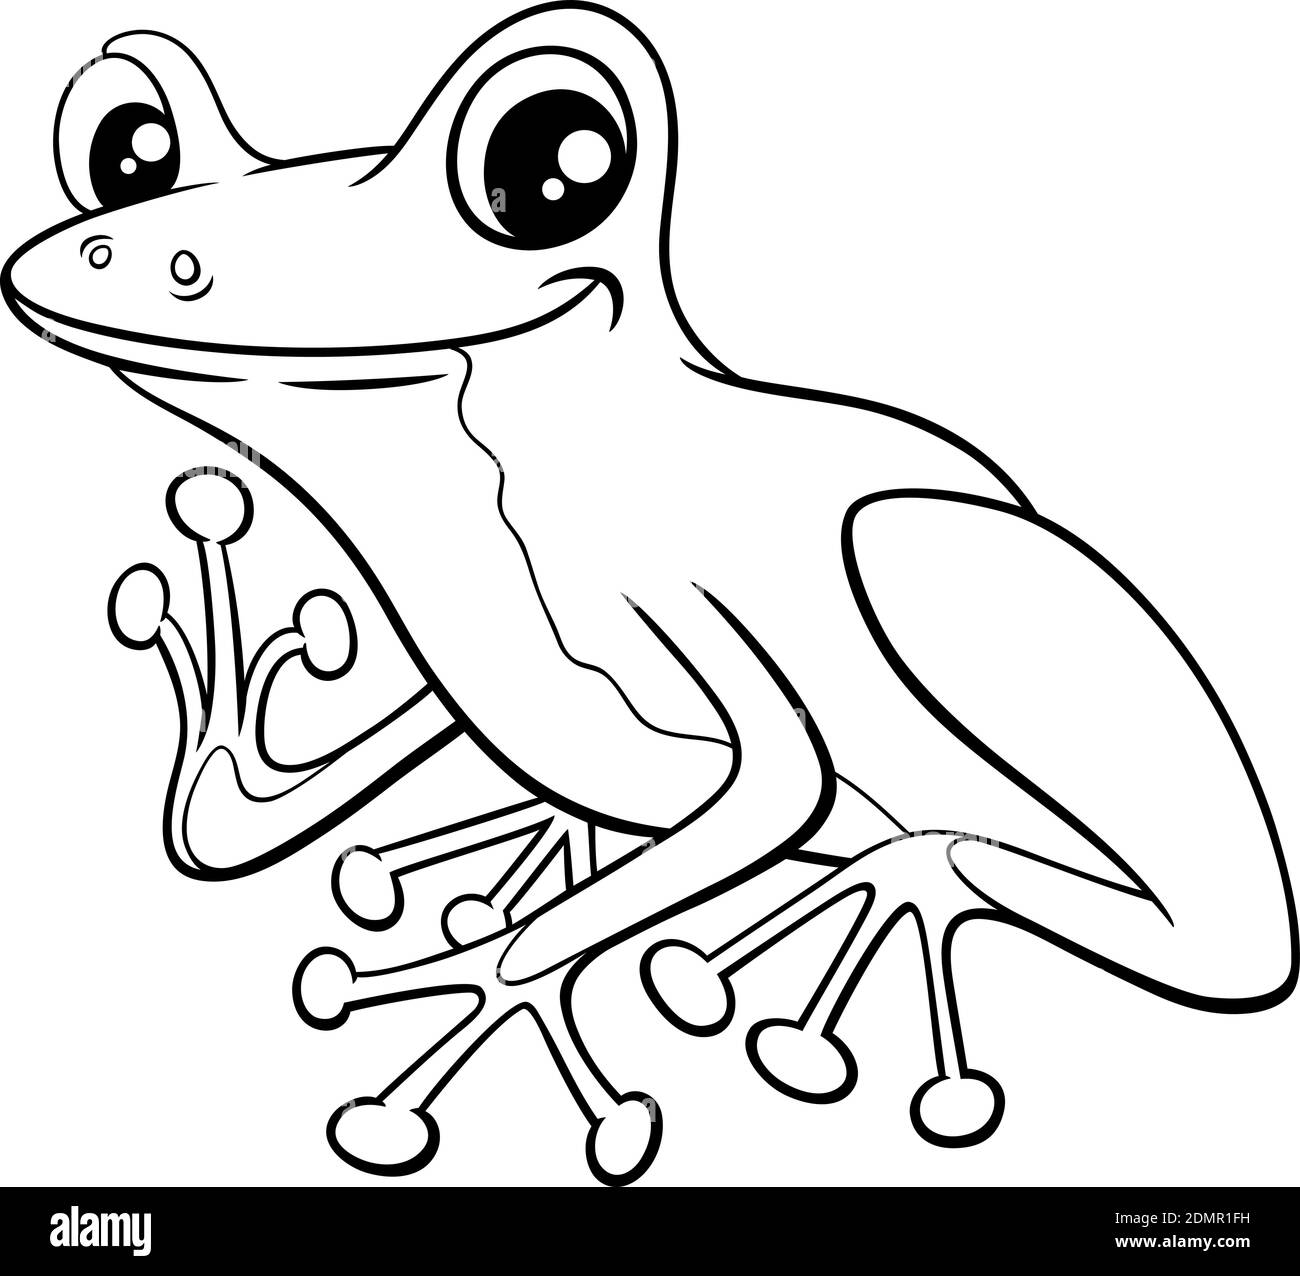 Black and white cartoon illustration of cute little tree frog comic animal character coloring book page Stock Vector